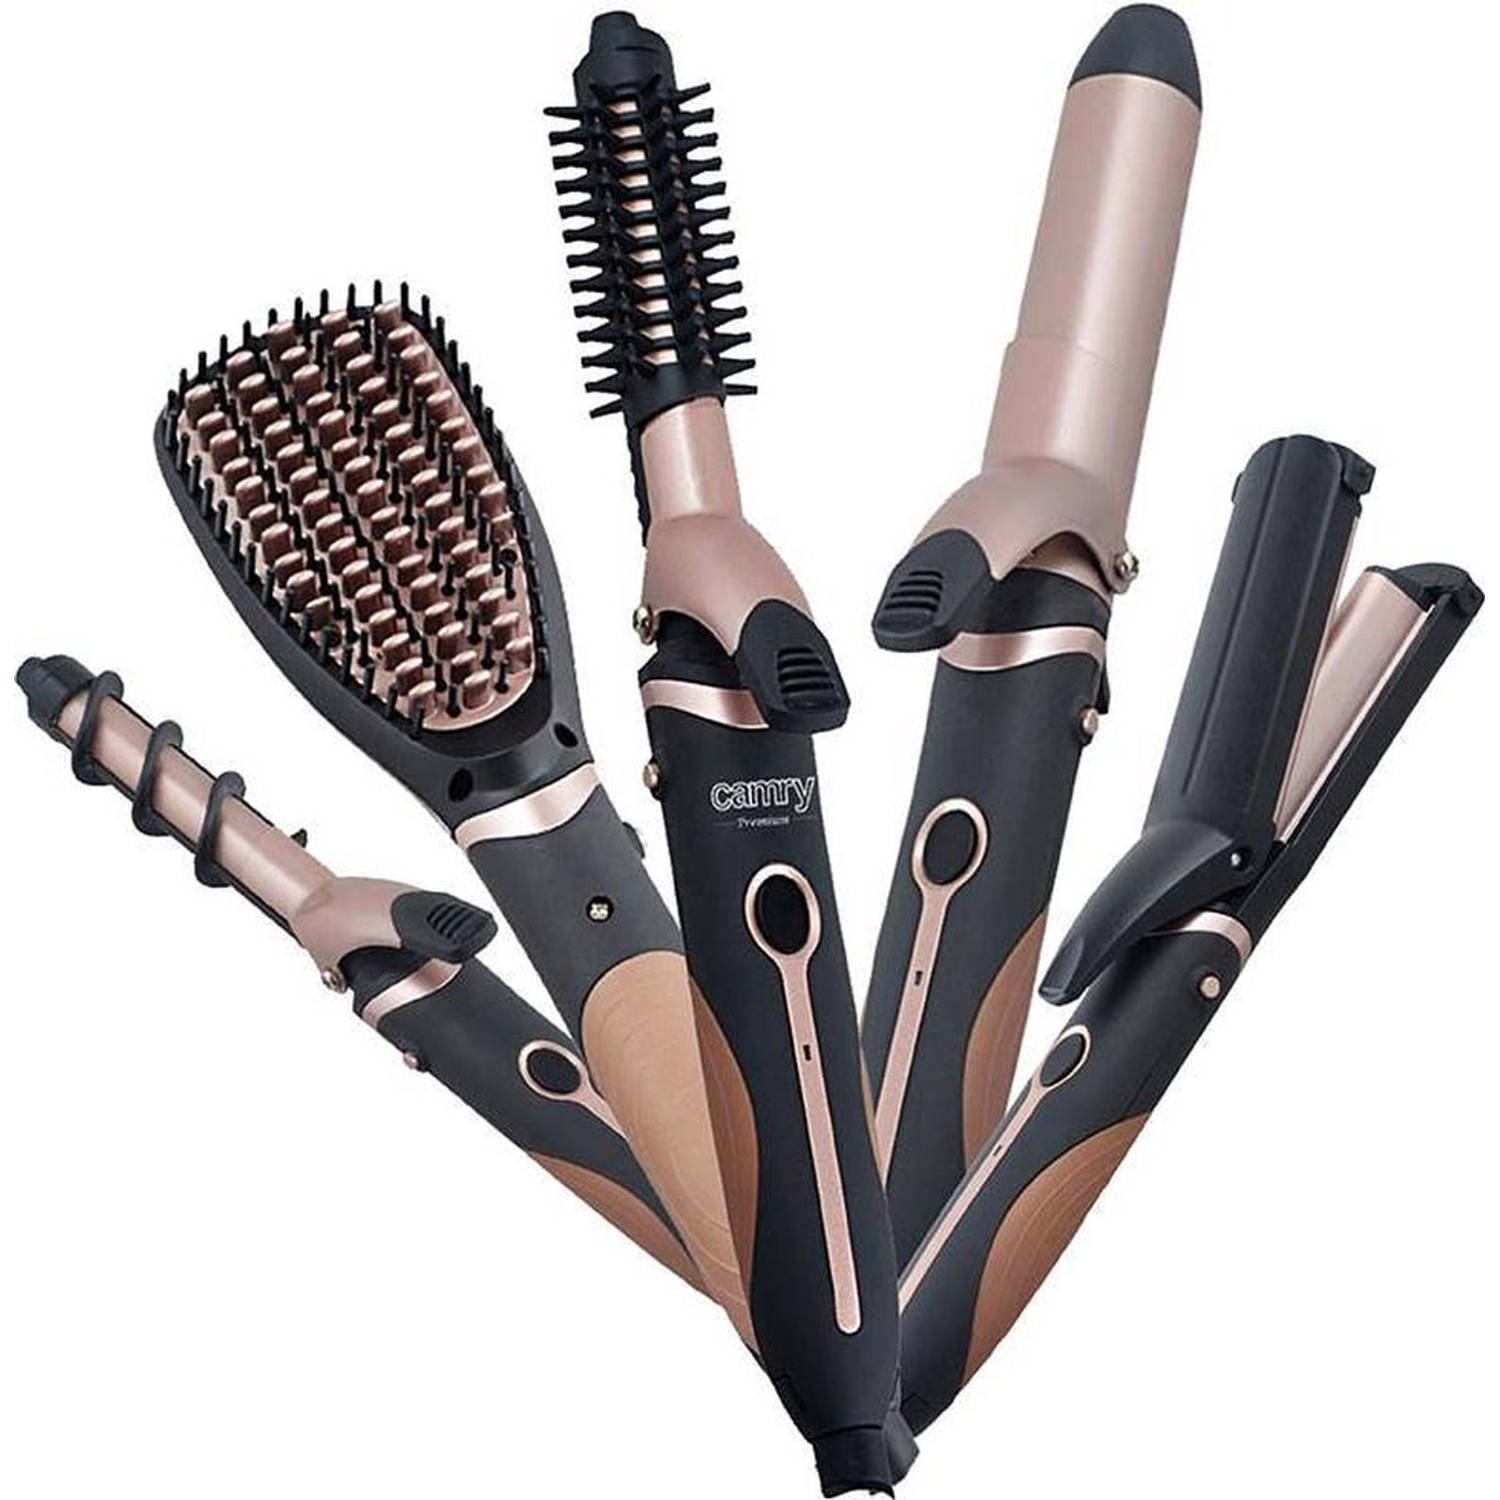 Camry CR 2024 - Hairstylerset - 5 delig